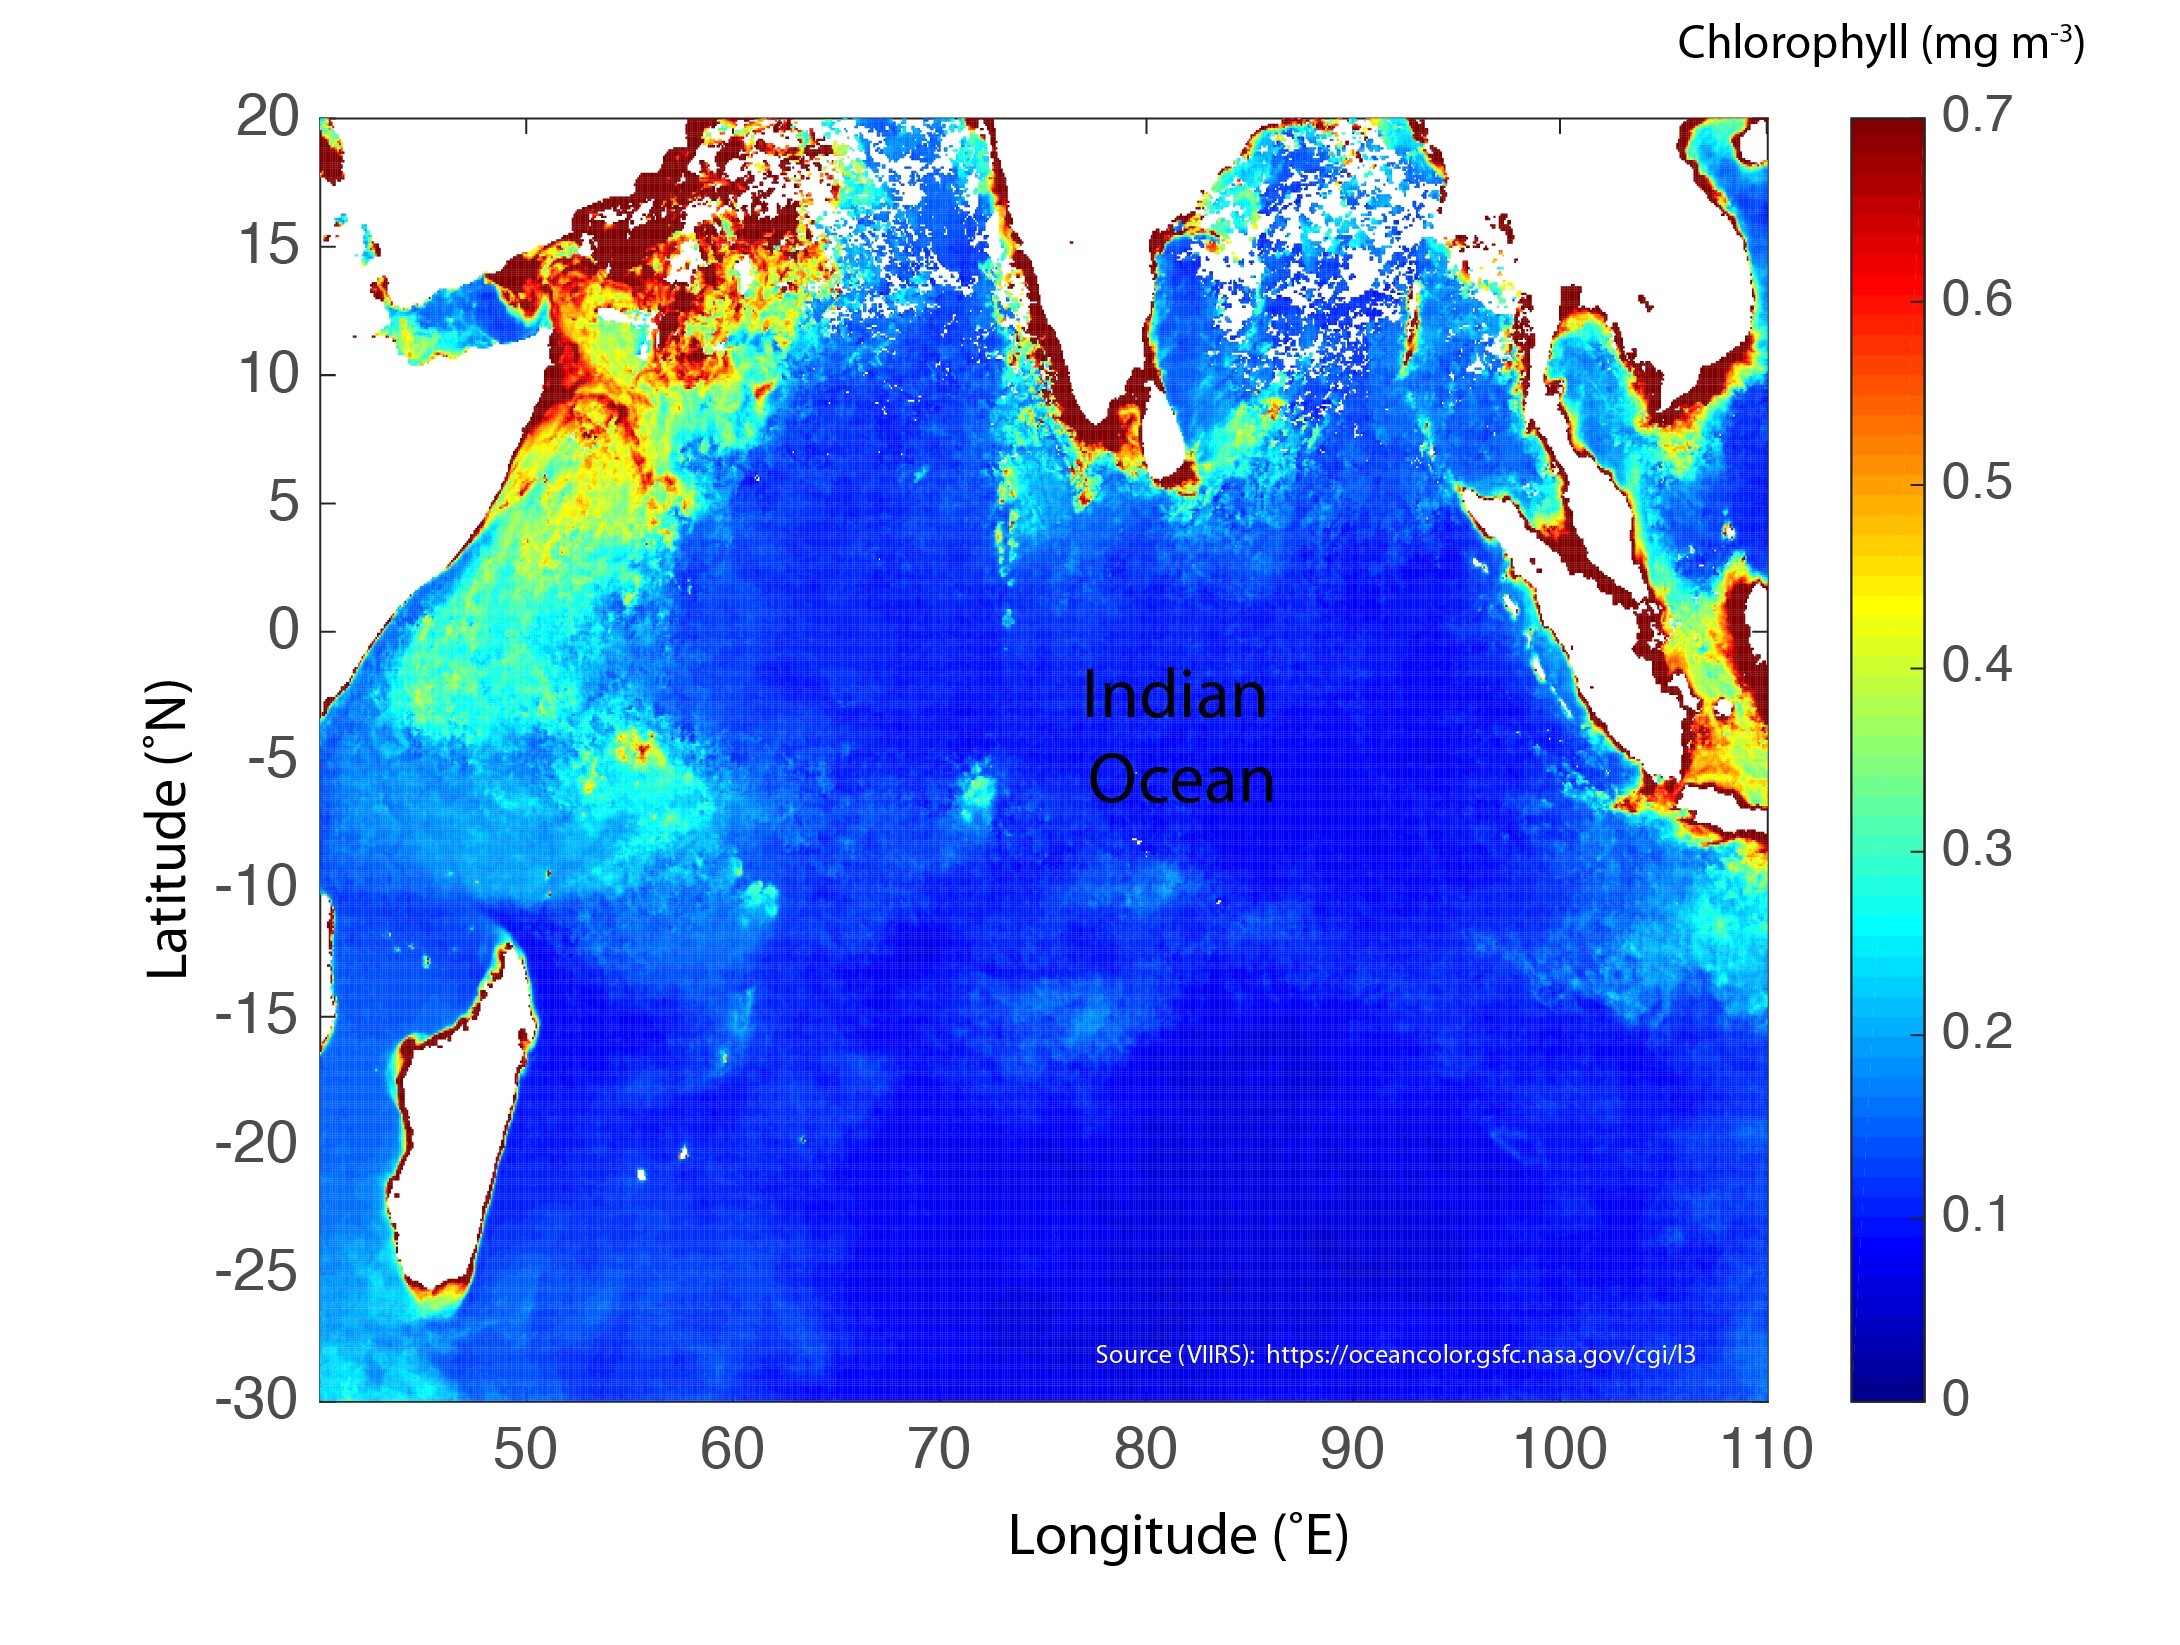 Chlorophyll concentrations in the Indian Ocean